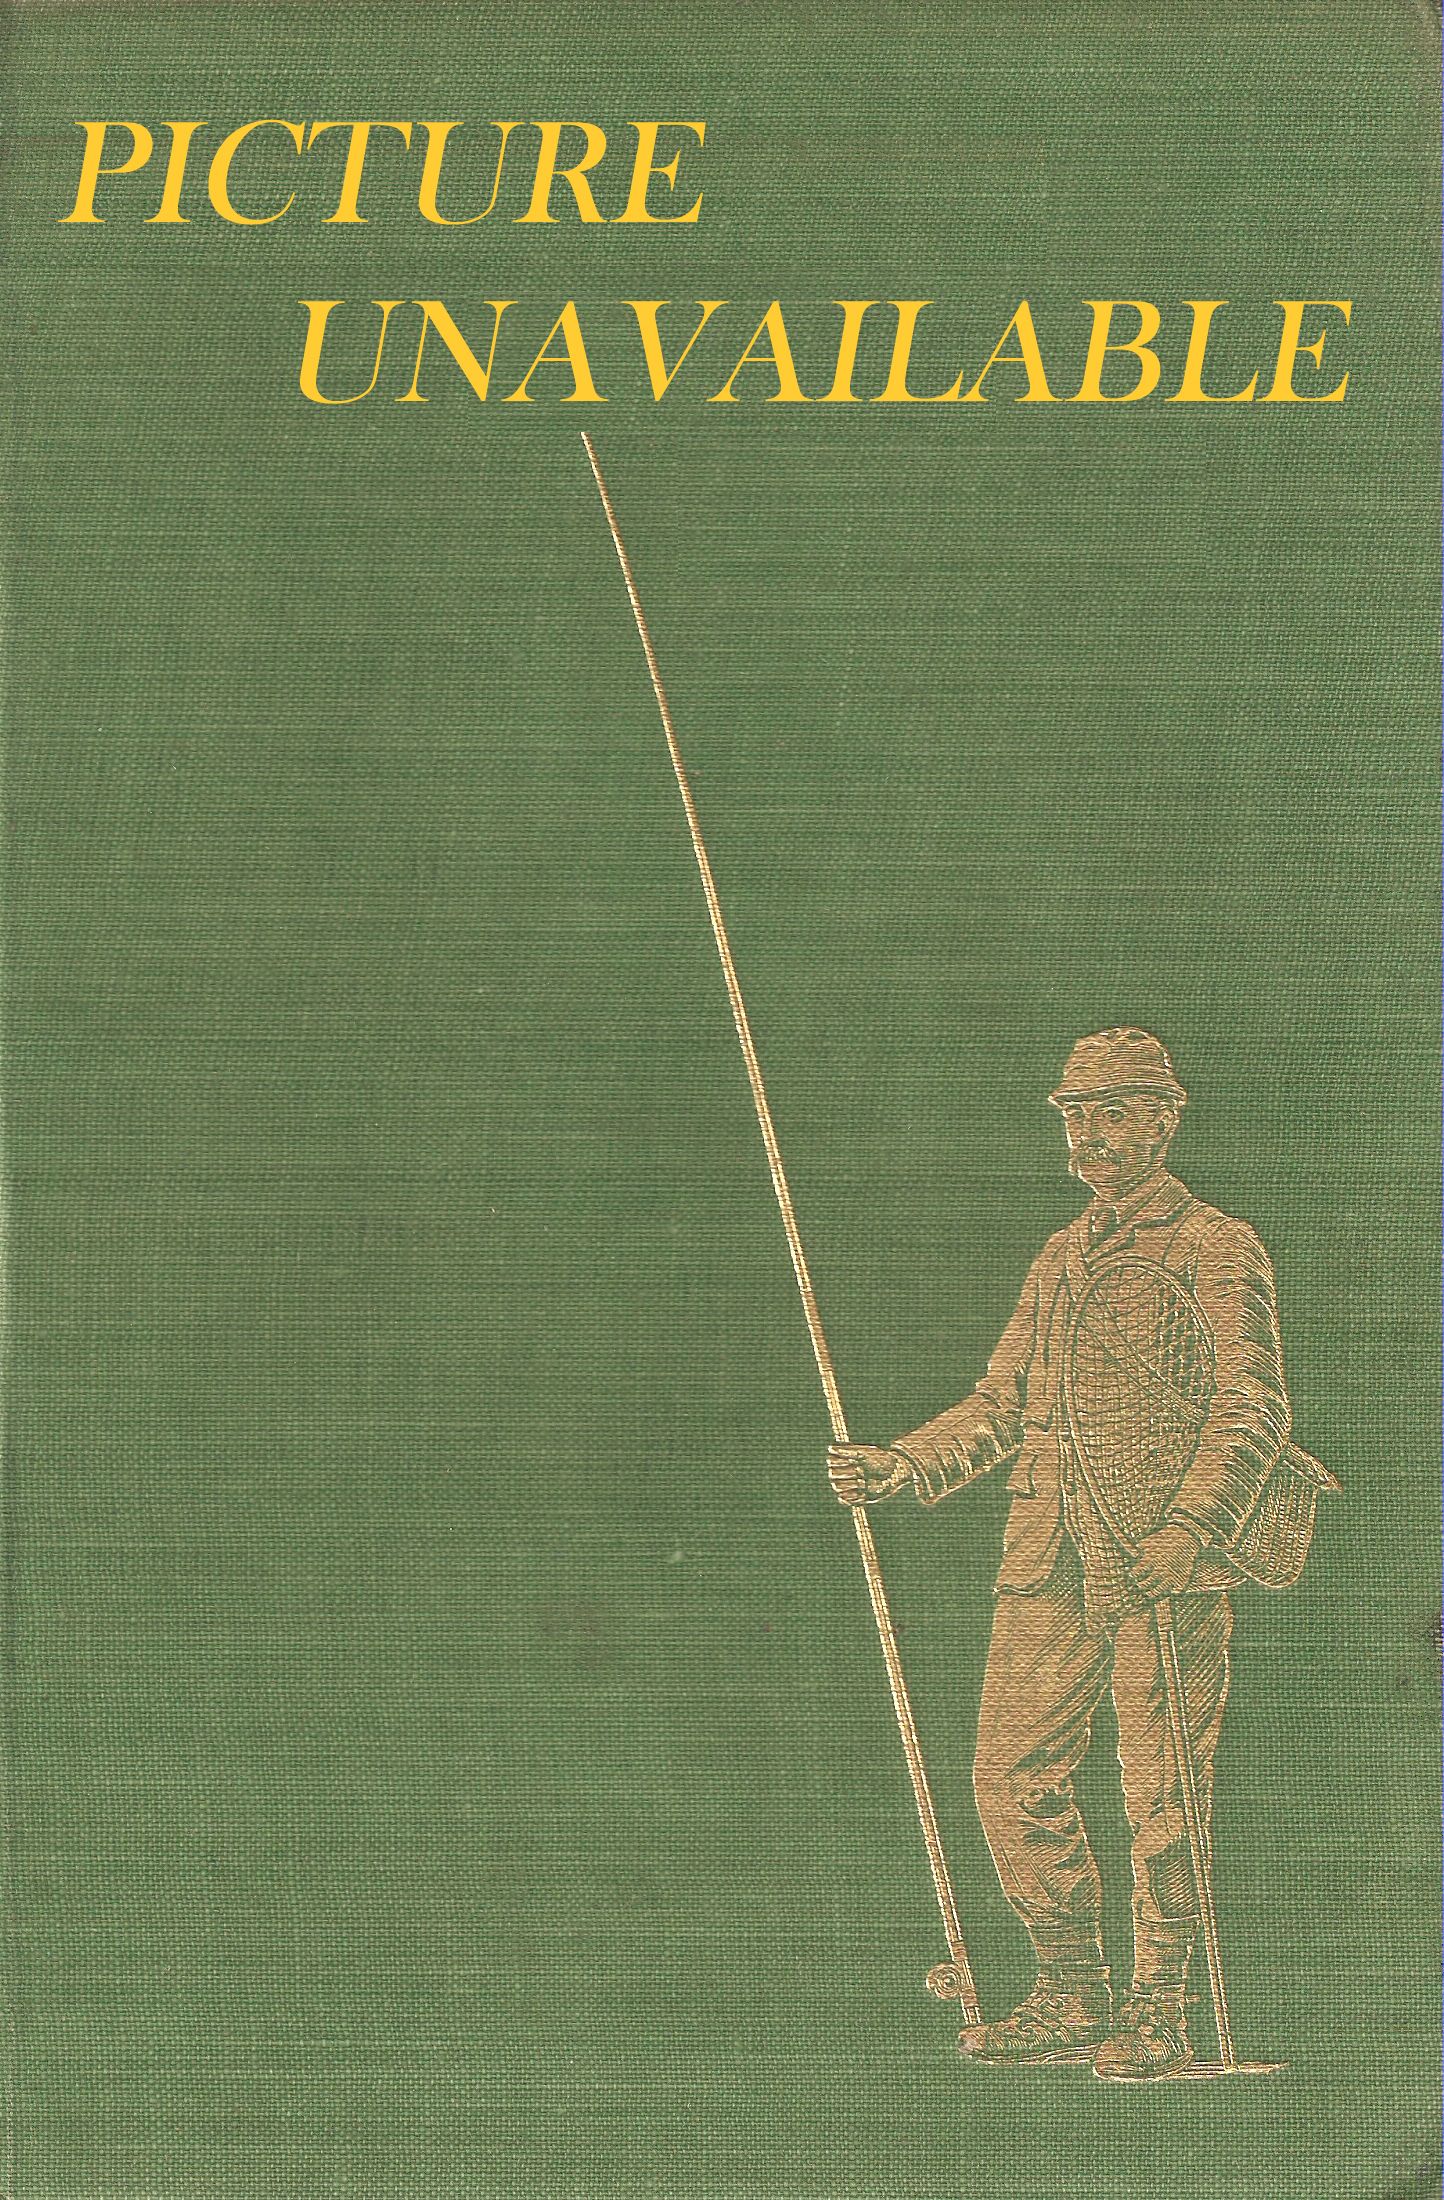 TO CAST A TROUT FLY. A Step-by Step Guide for the Modern Angler, by Messrs. Farlow's and Hardy Brothers in conjunction with Scientific Anglers Inc., of America.